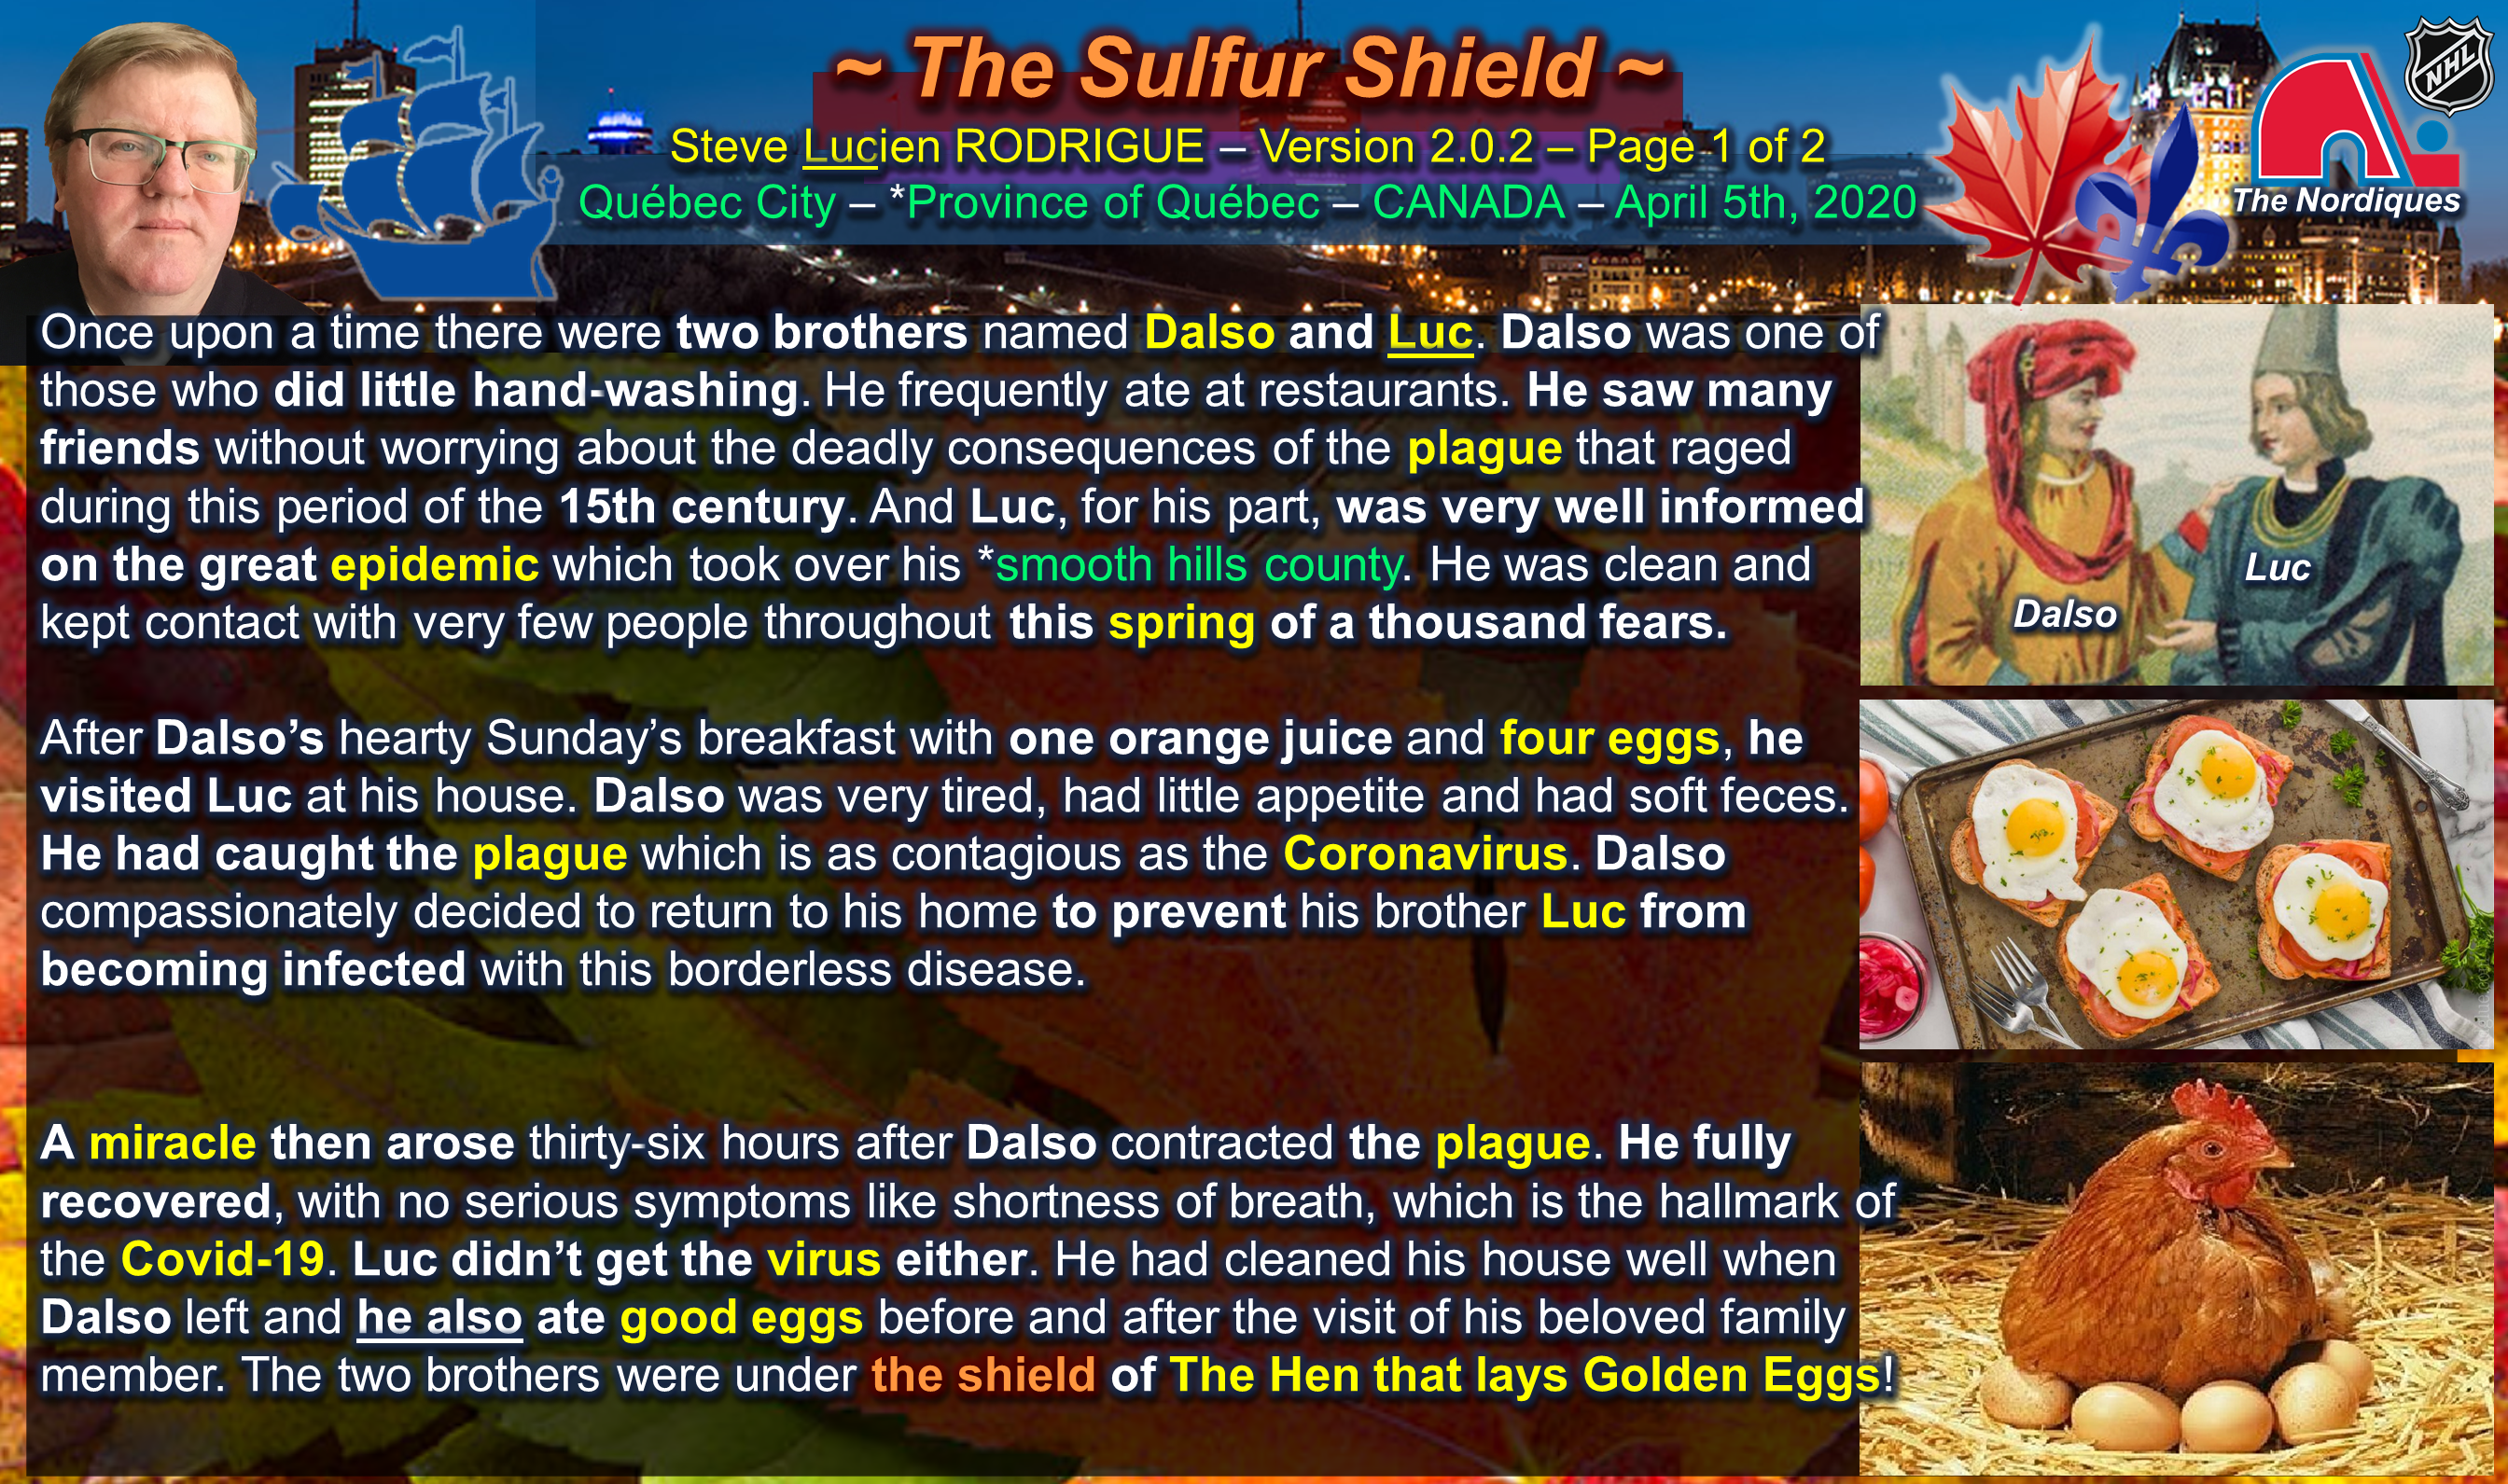 The Sulfur Shield Page 1